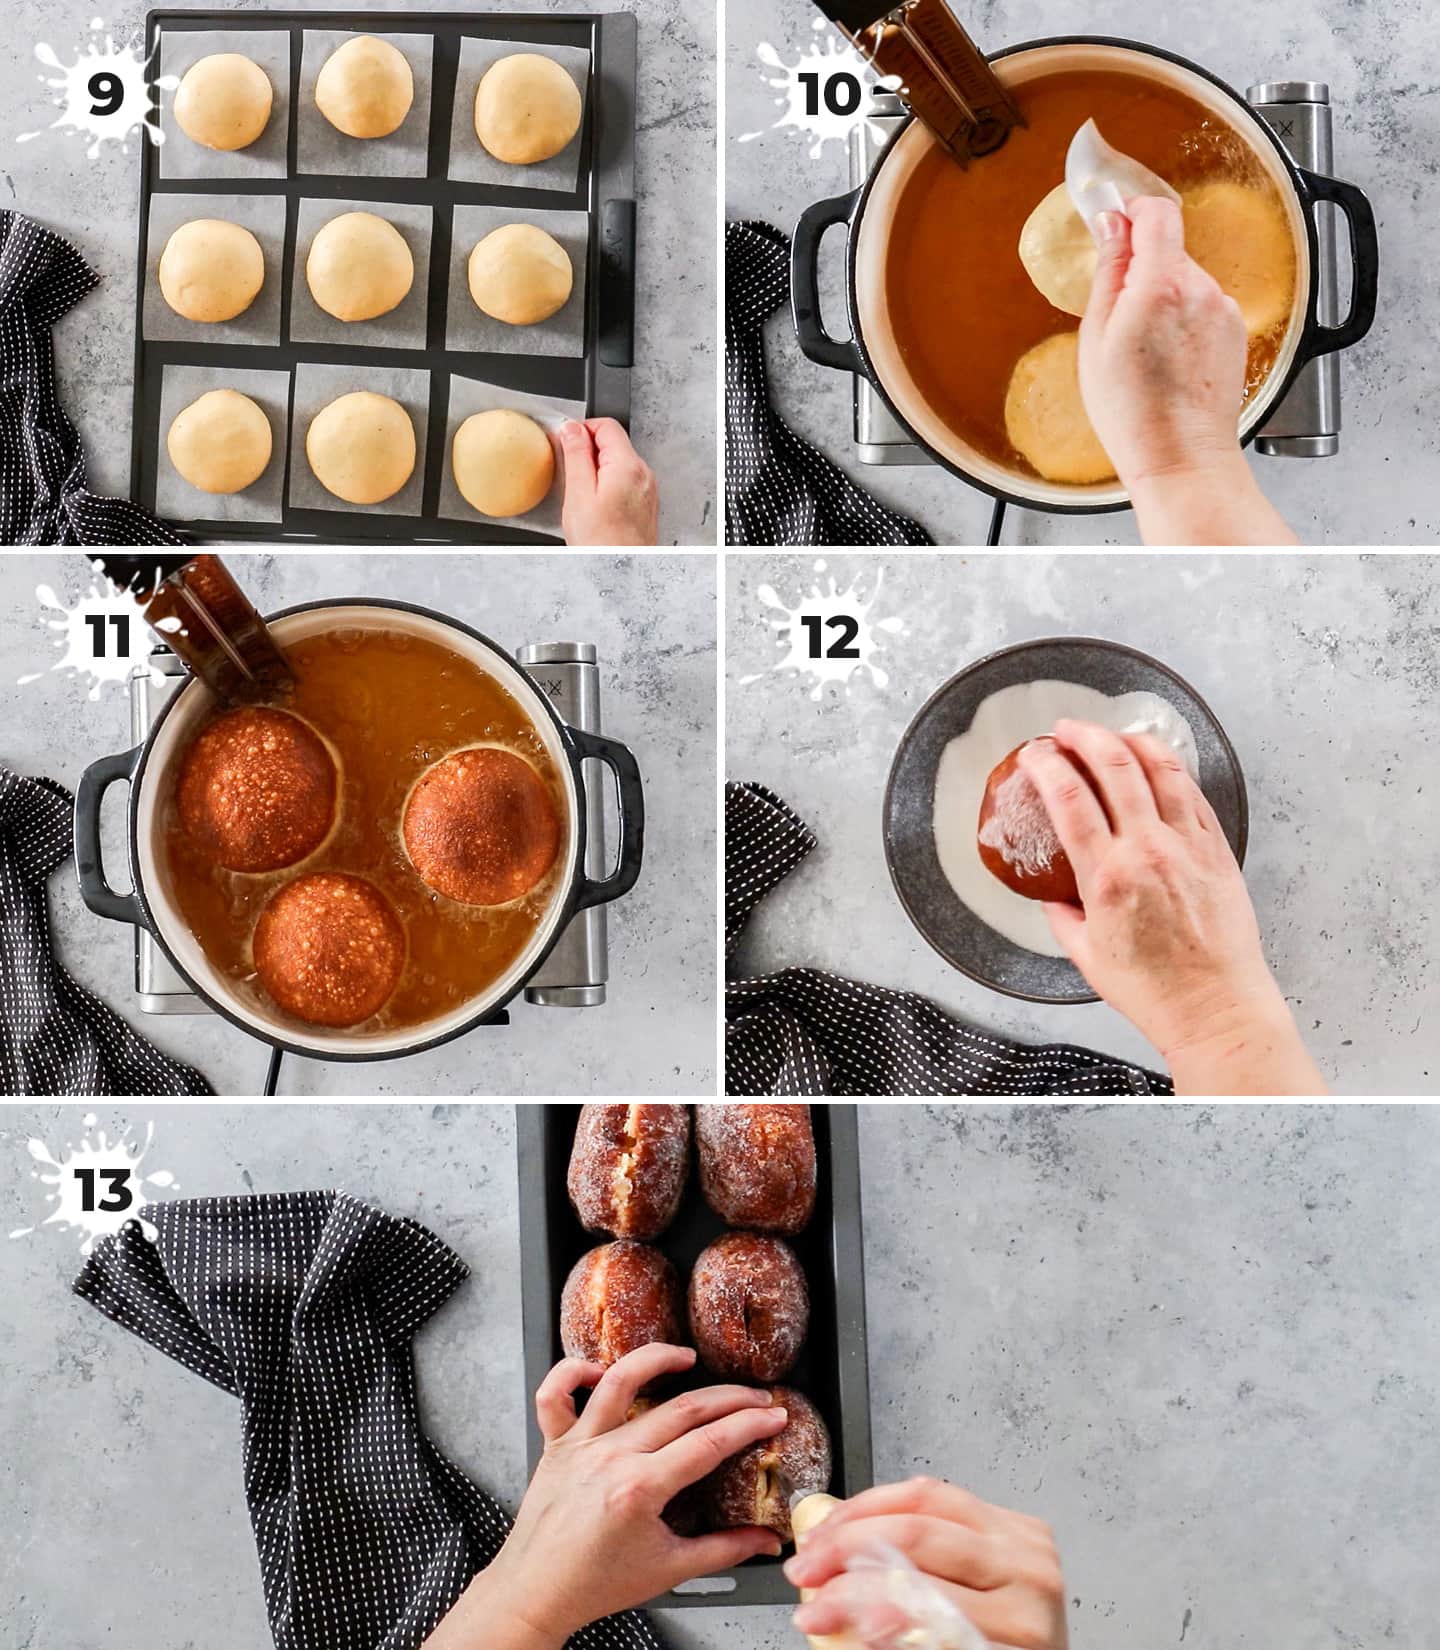 A collage of 6 images showing how to cook and fill Bavarian donuts.